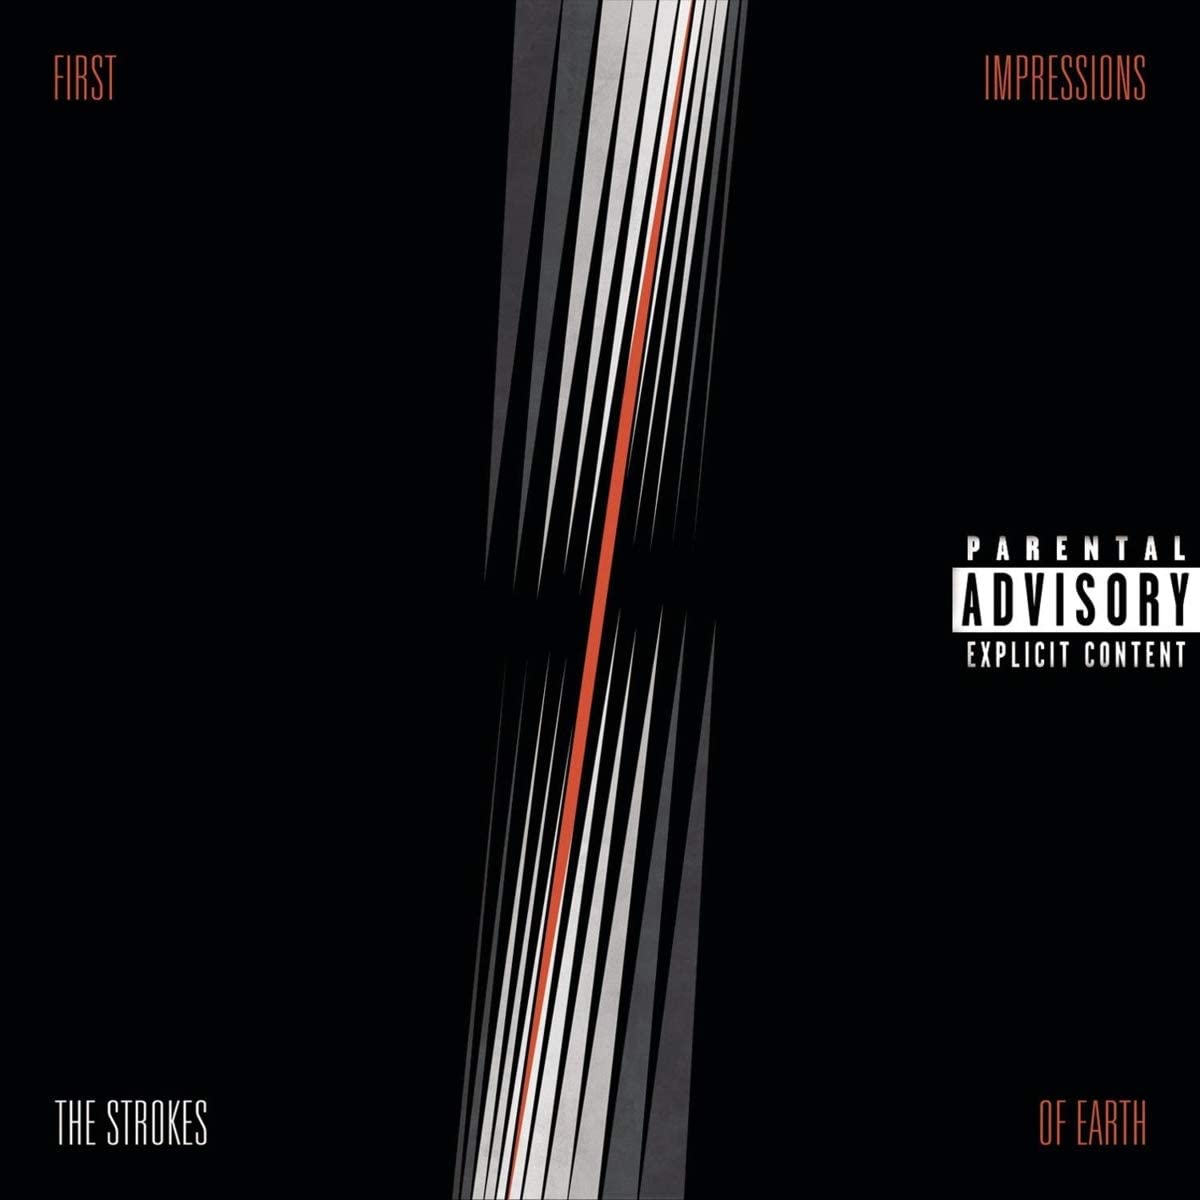 First Impressions of Earth - Vinyl | The Strokes image0